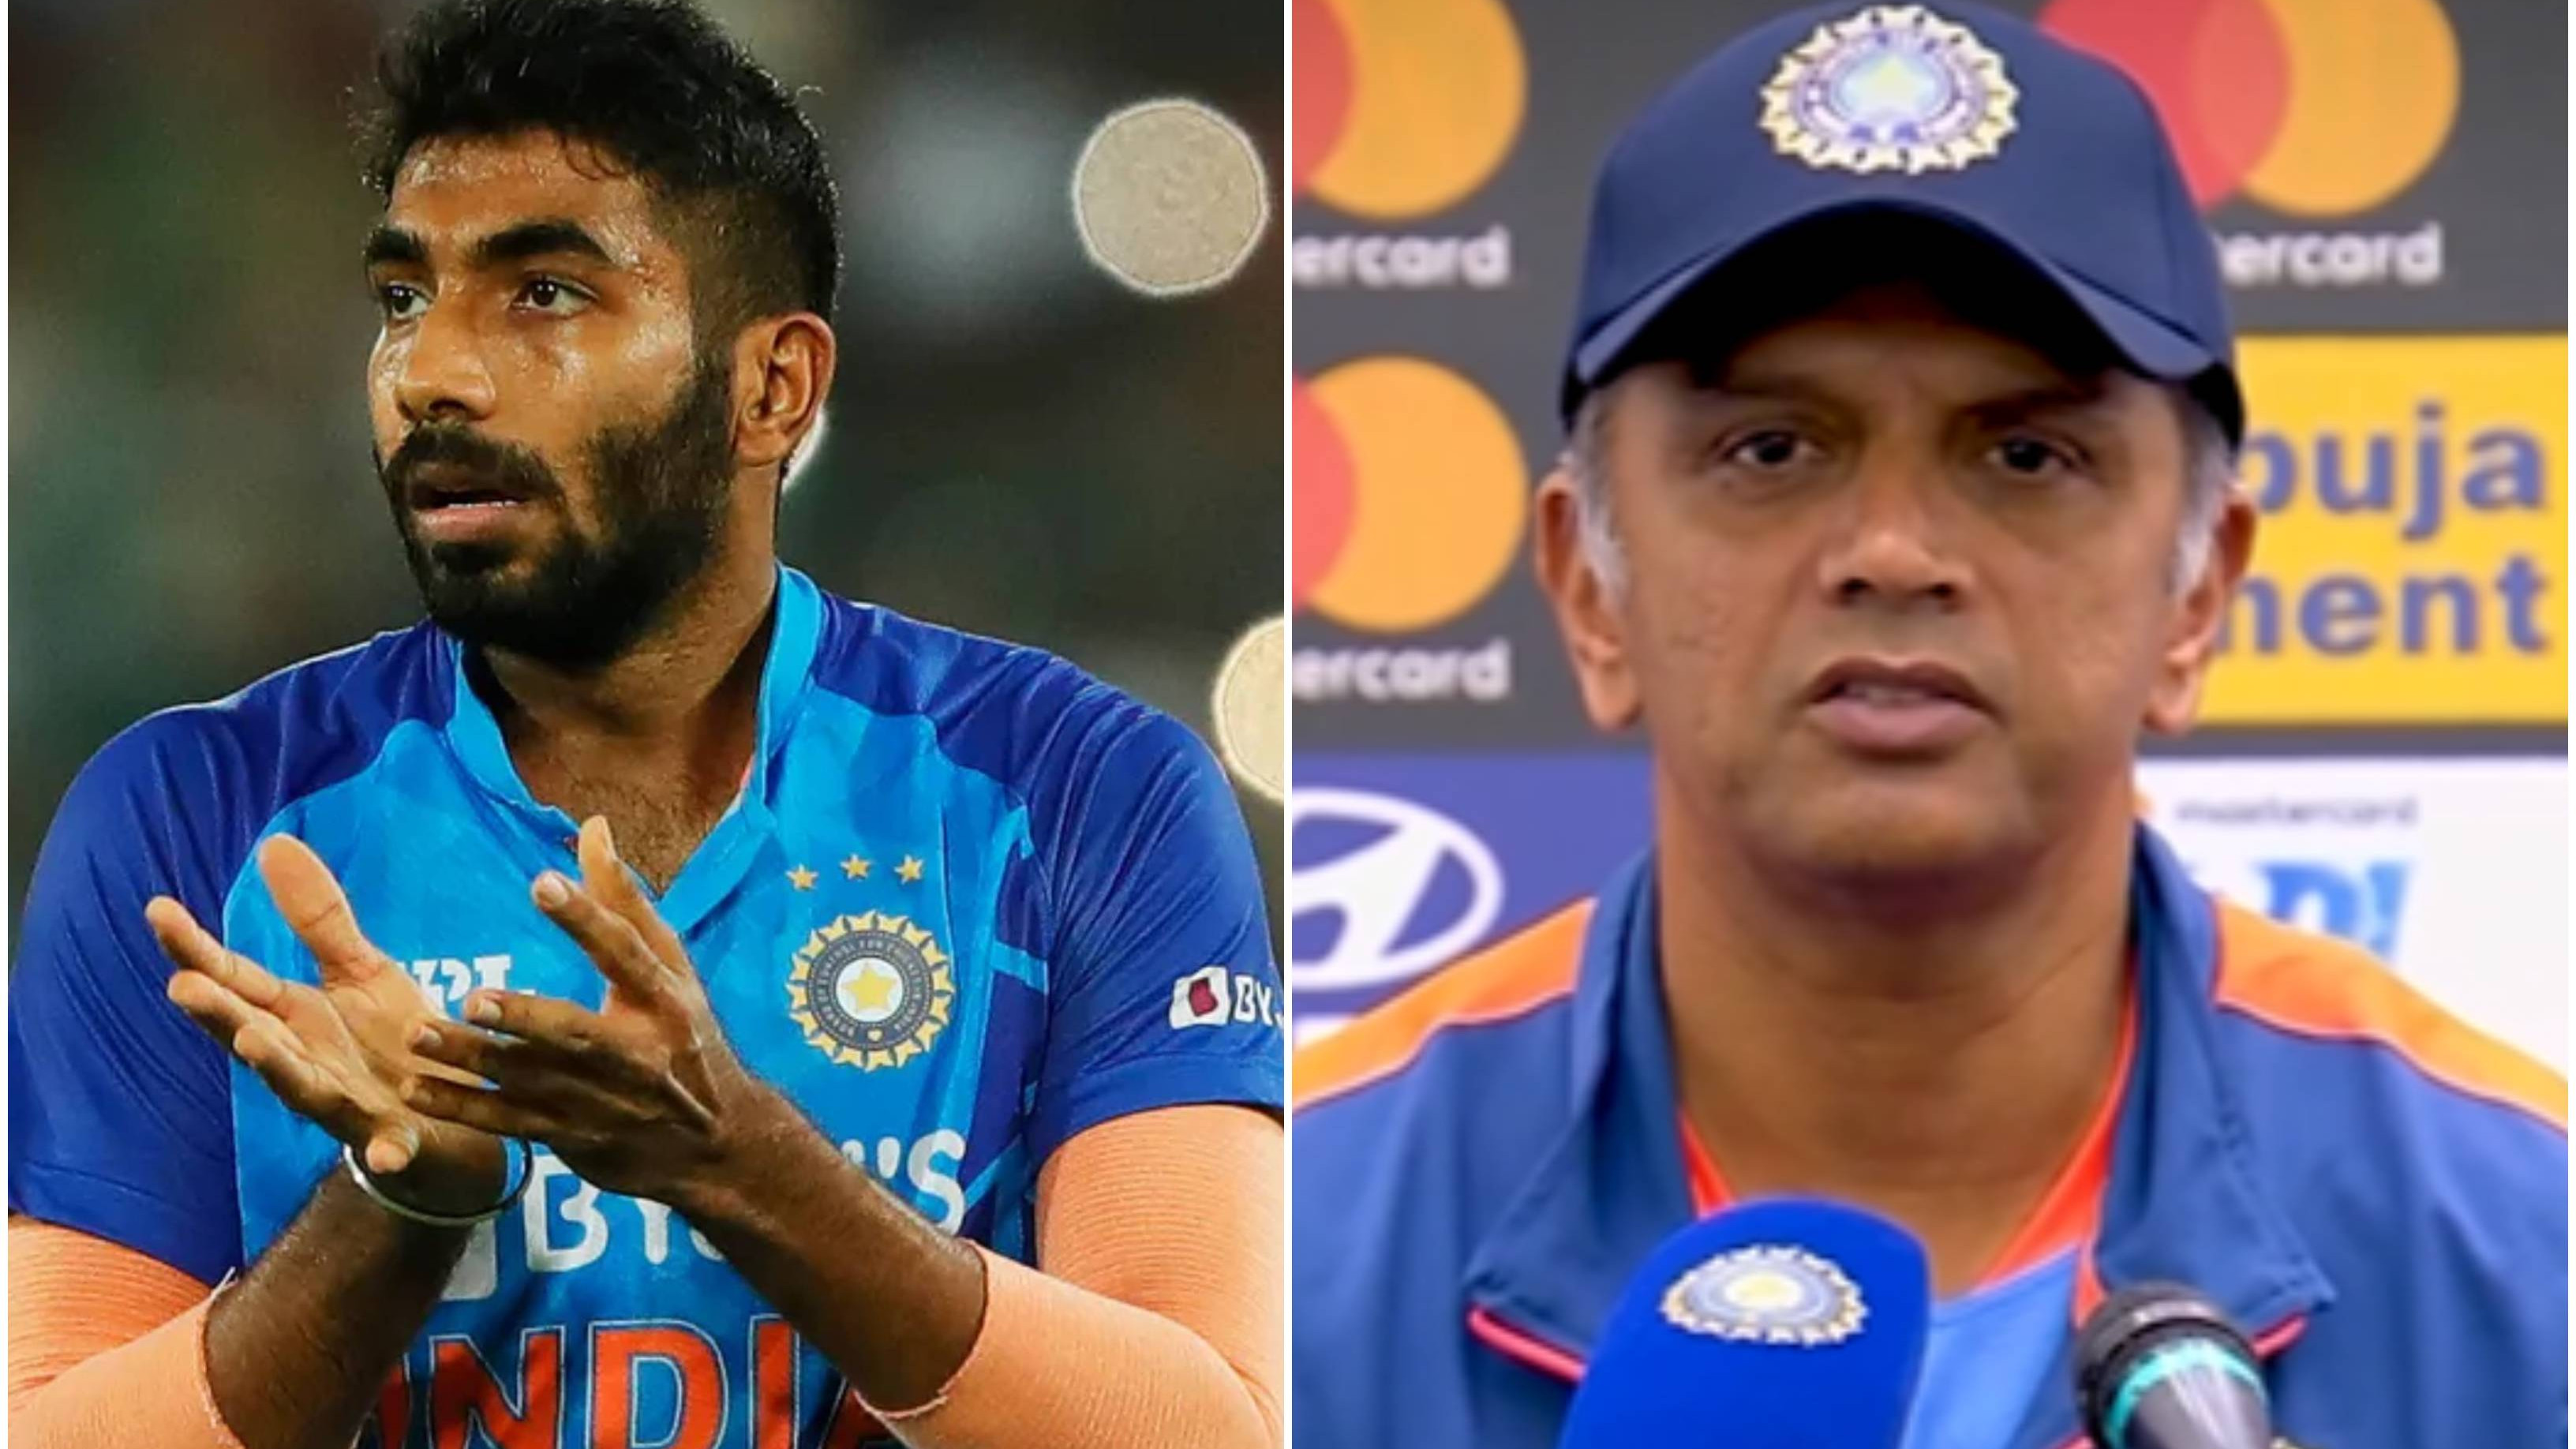 IND v SA 2022: “We will have a look…” Dravid drops big hint on Bumrah’s replacement for upcoming T20 World Cup